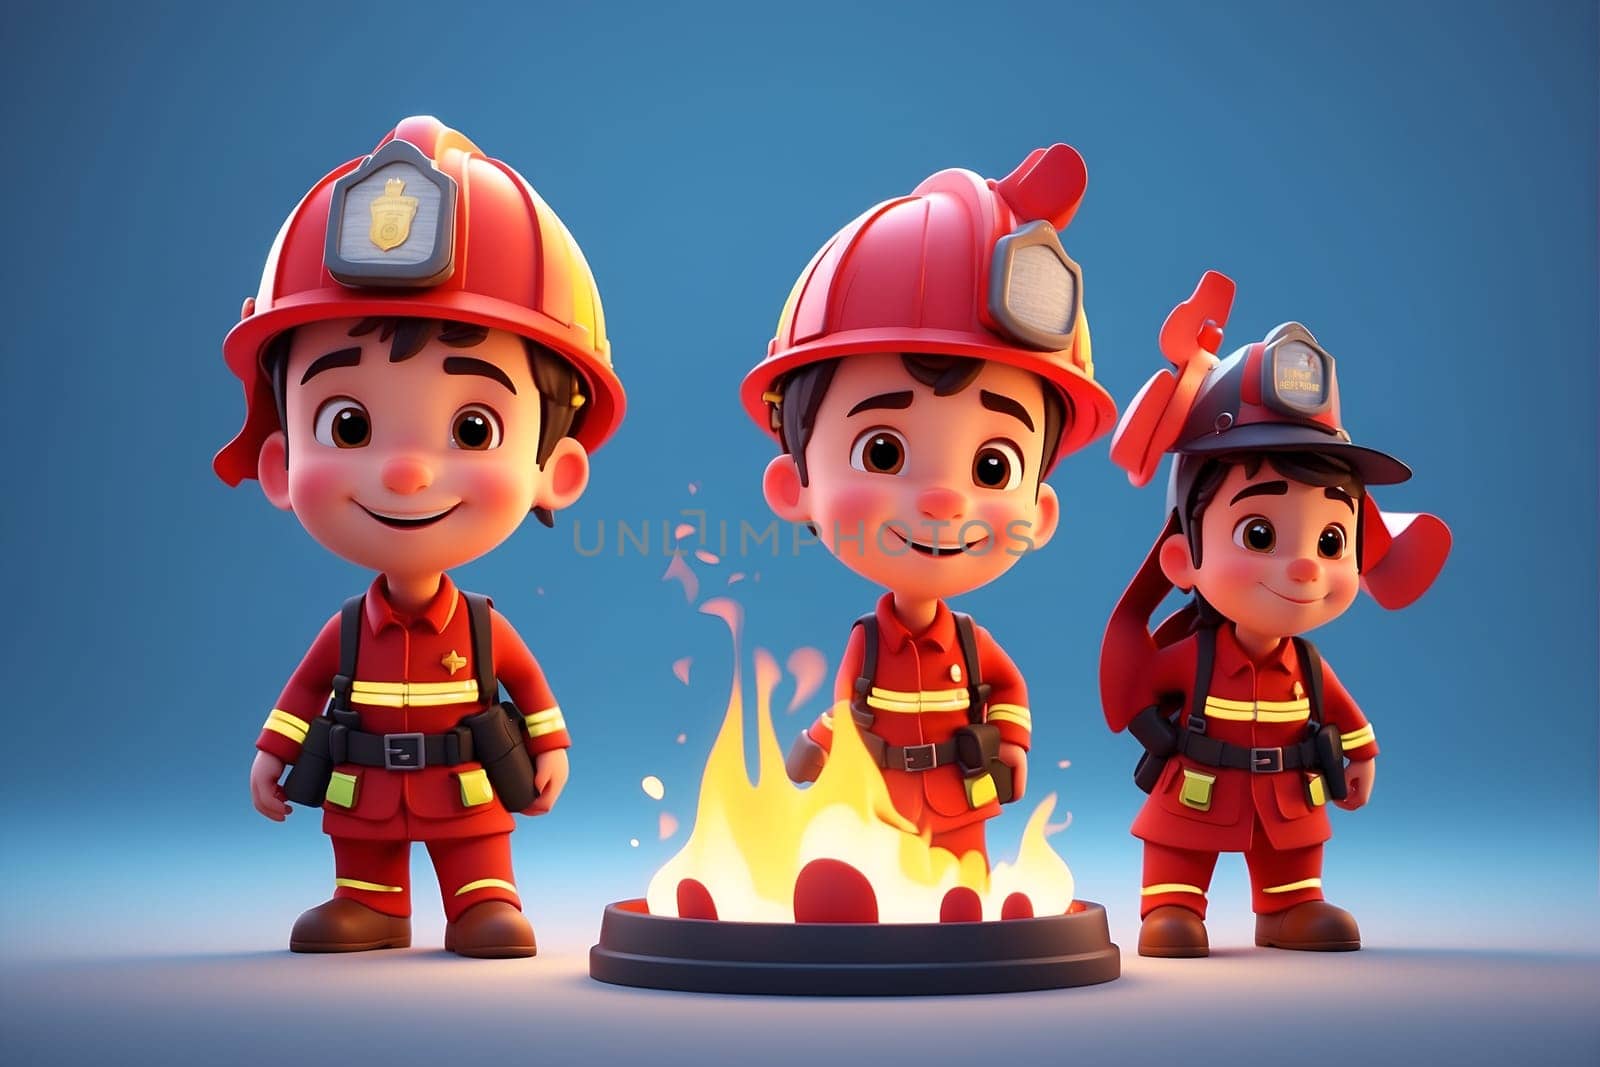 A group of dedicated firefighters stand next to a blazing fire, working together to combat the inferno and protect the community.